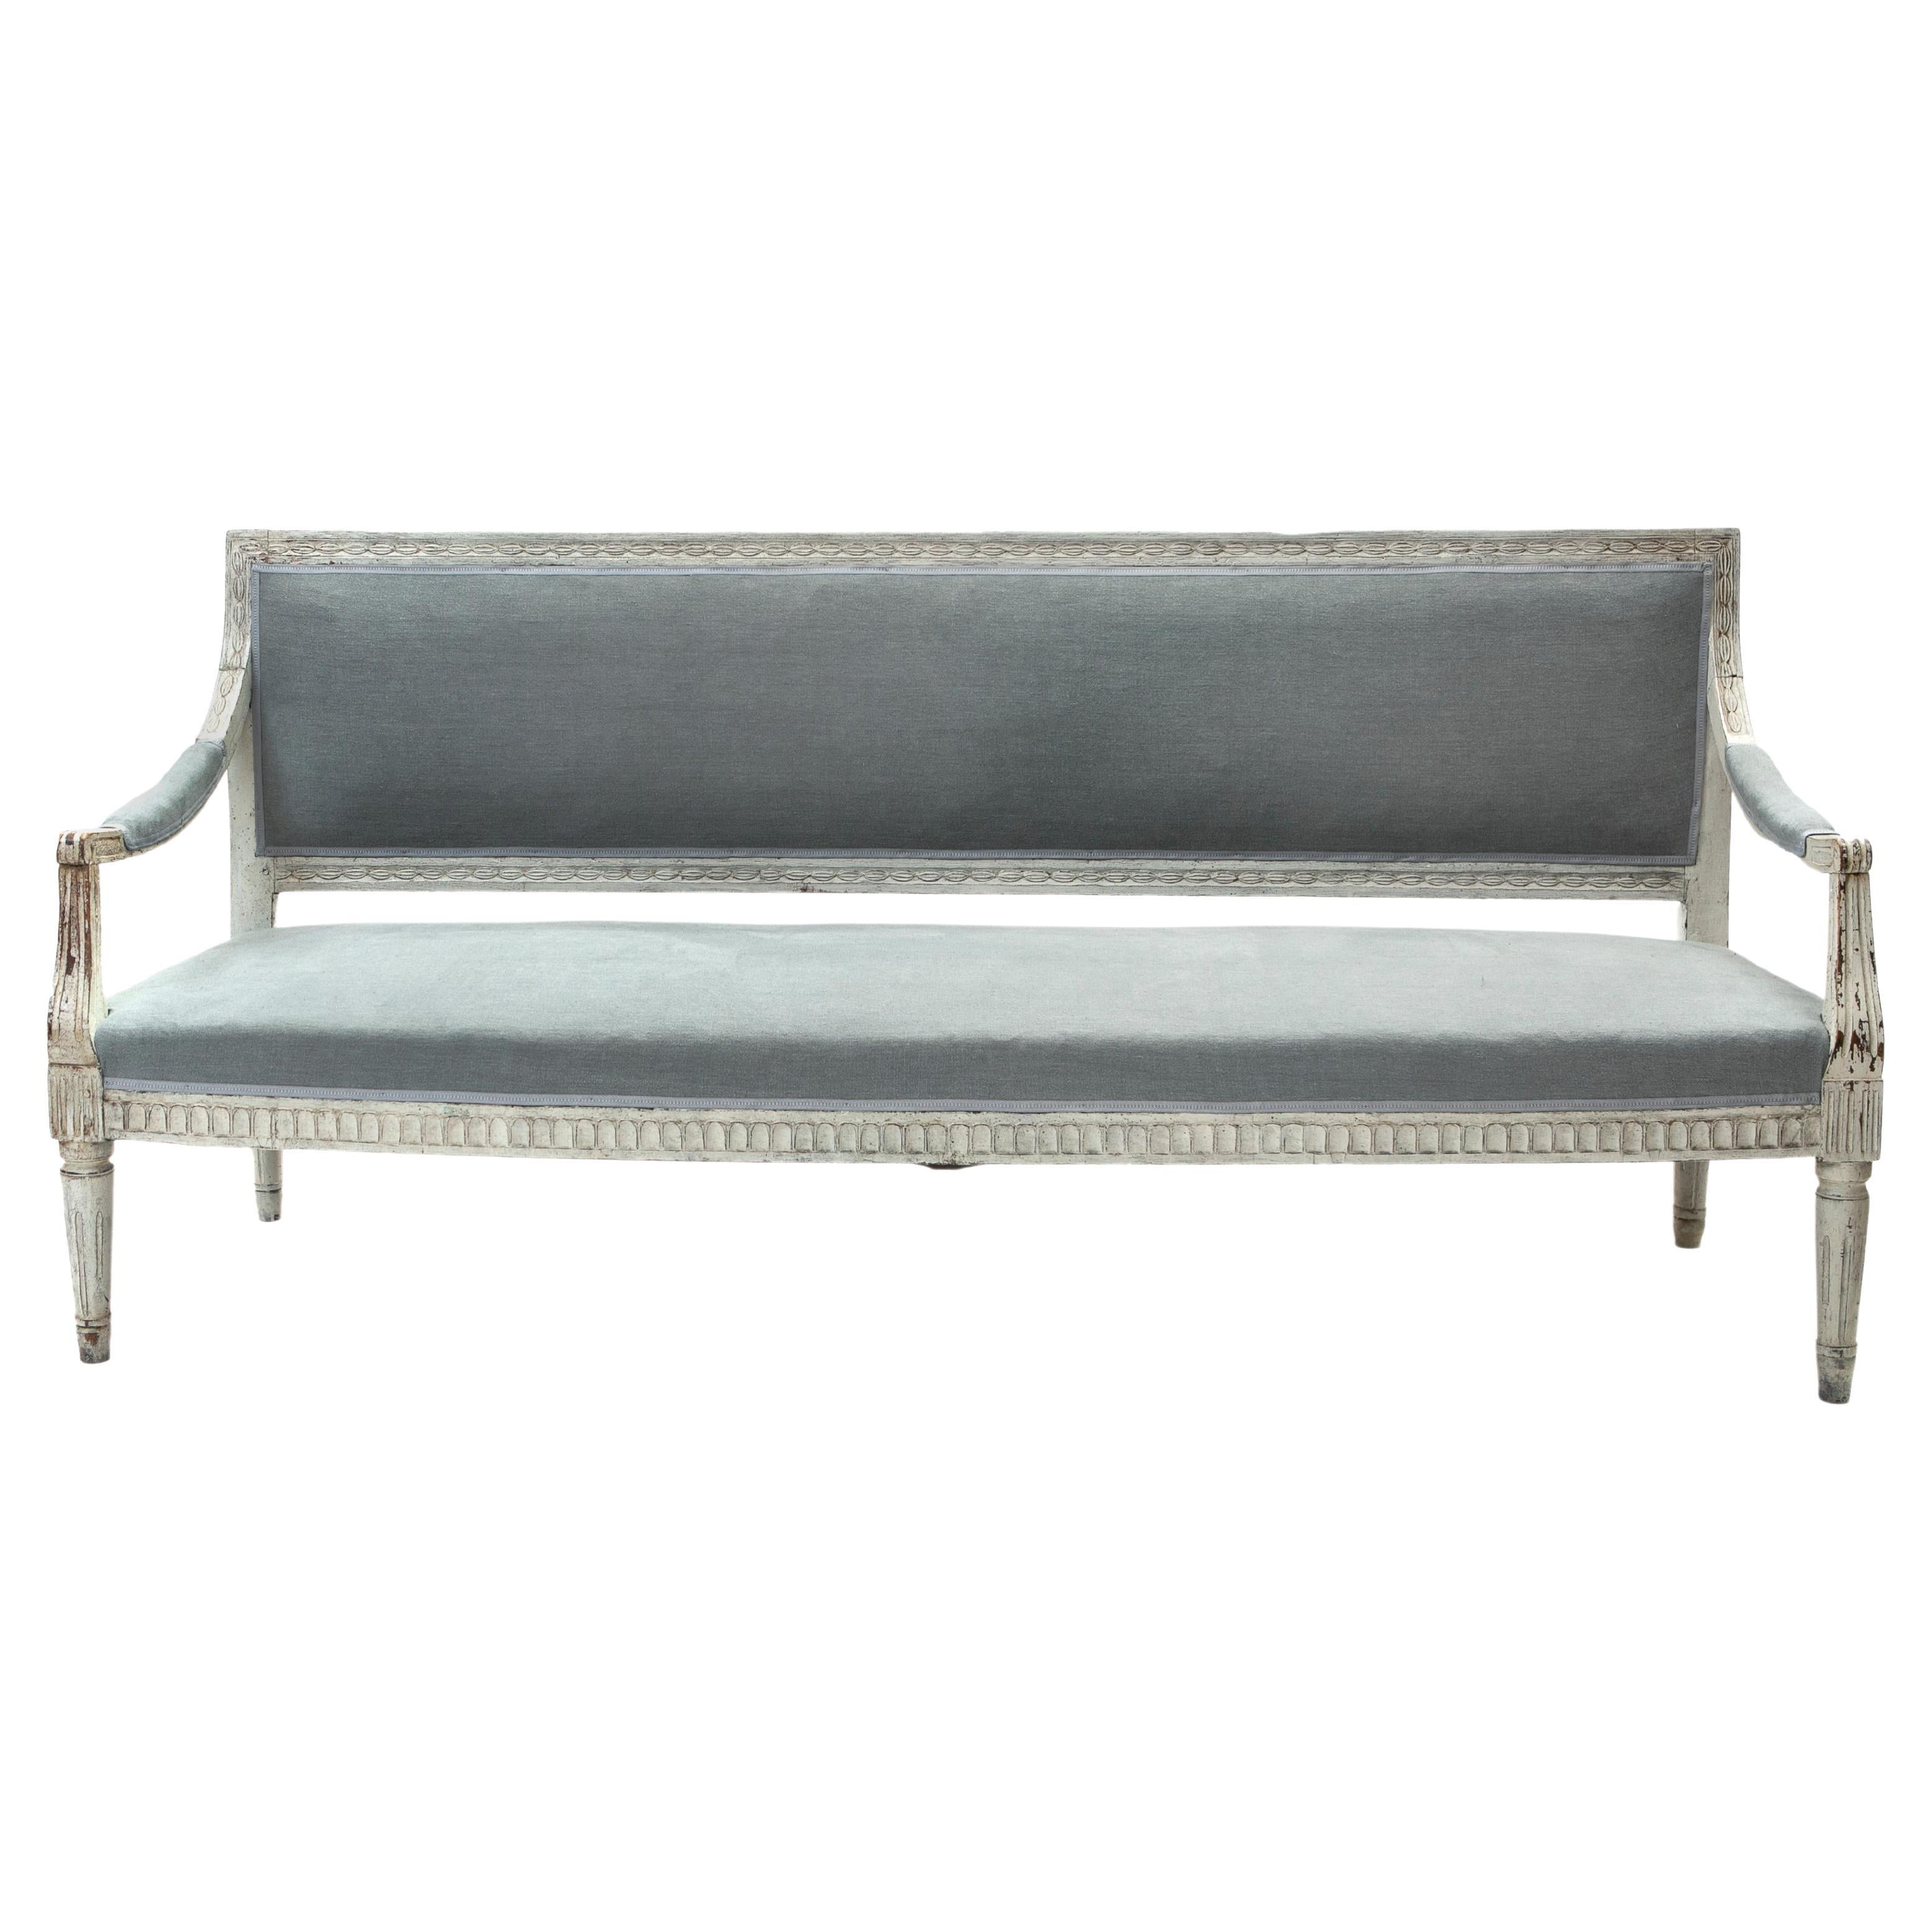 Swedish Gustavian White / Gray Painted Sofa Bench. Light Blue Fabric For Sale